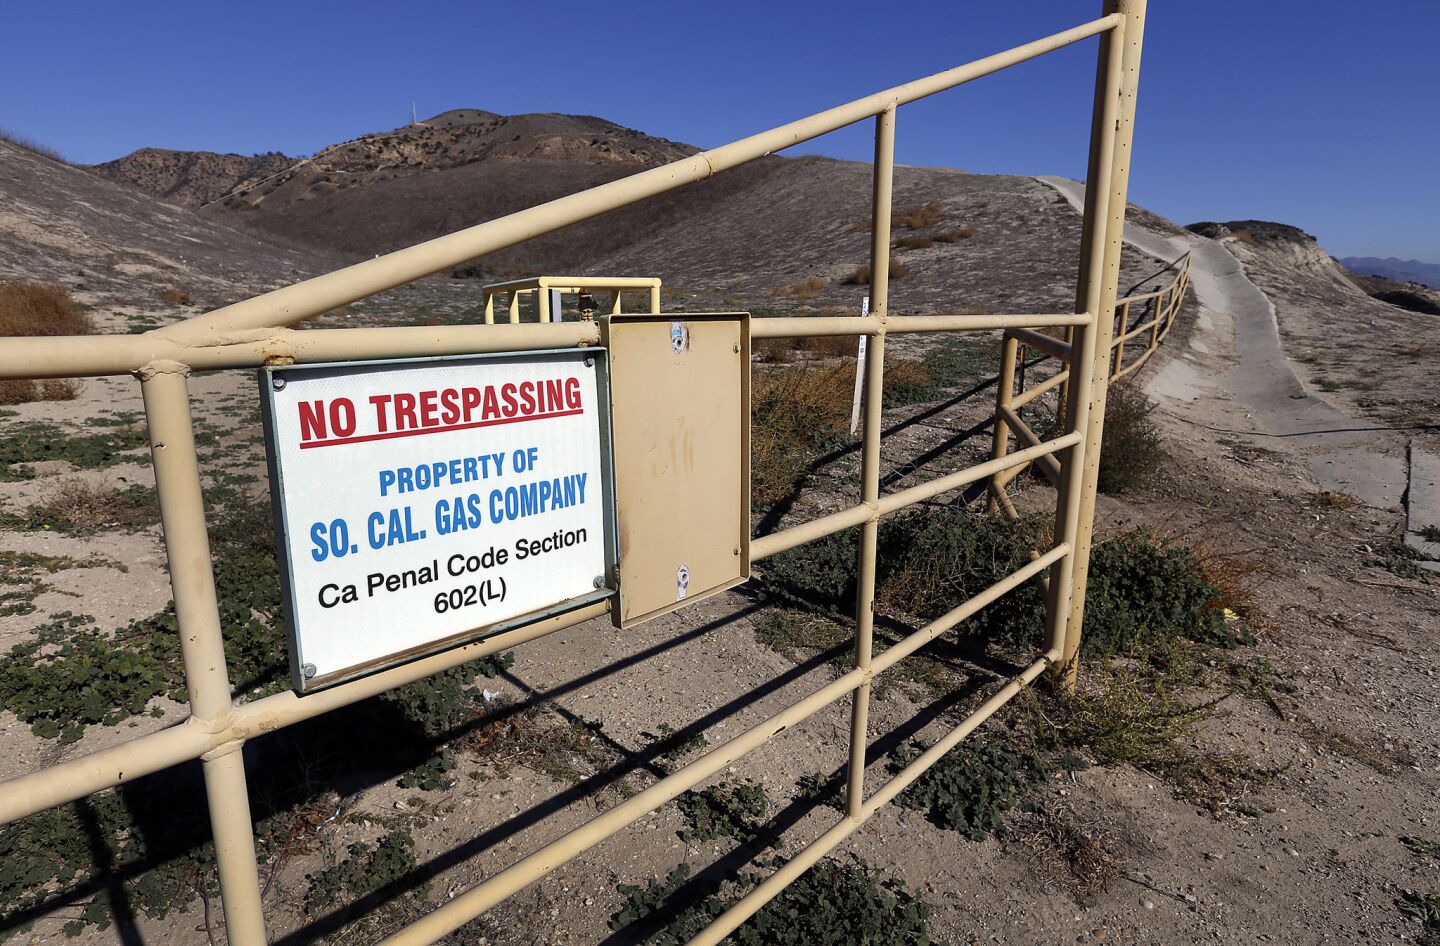 Signs and gates on the Porter Ranch hillsides indicate the boundary of Southern California Gas Co., where an ongoing gas leak has prompted hundreds of complaints.